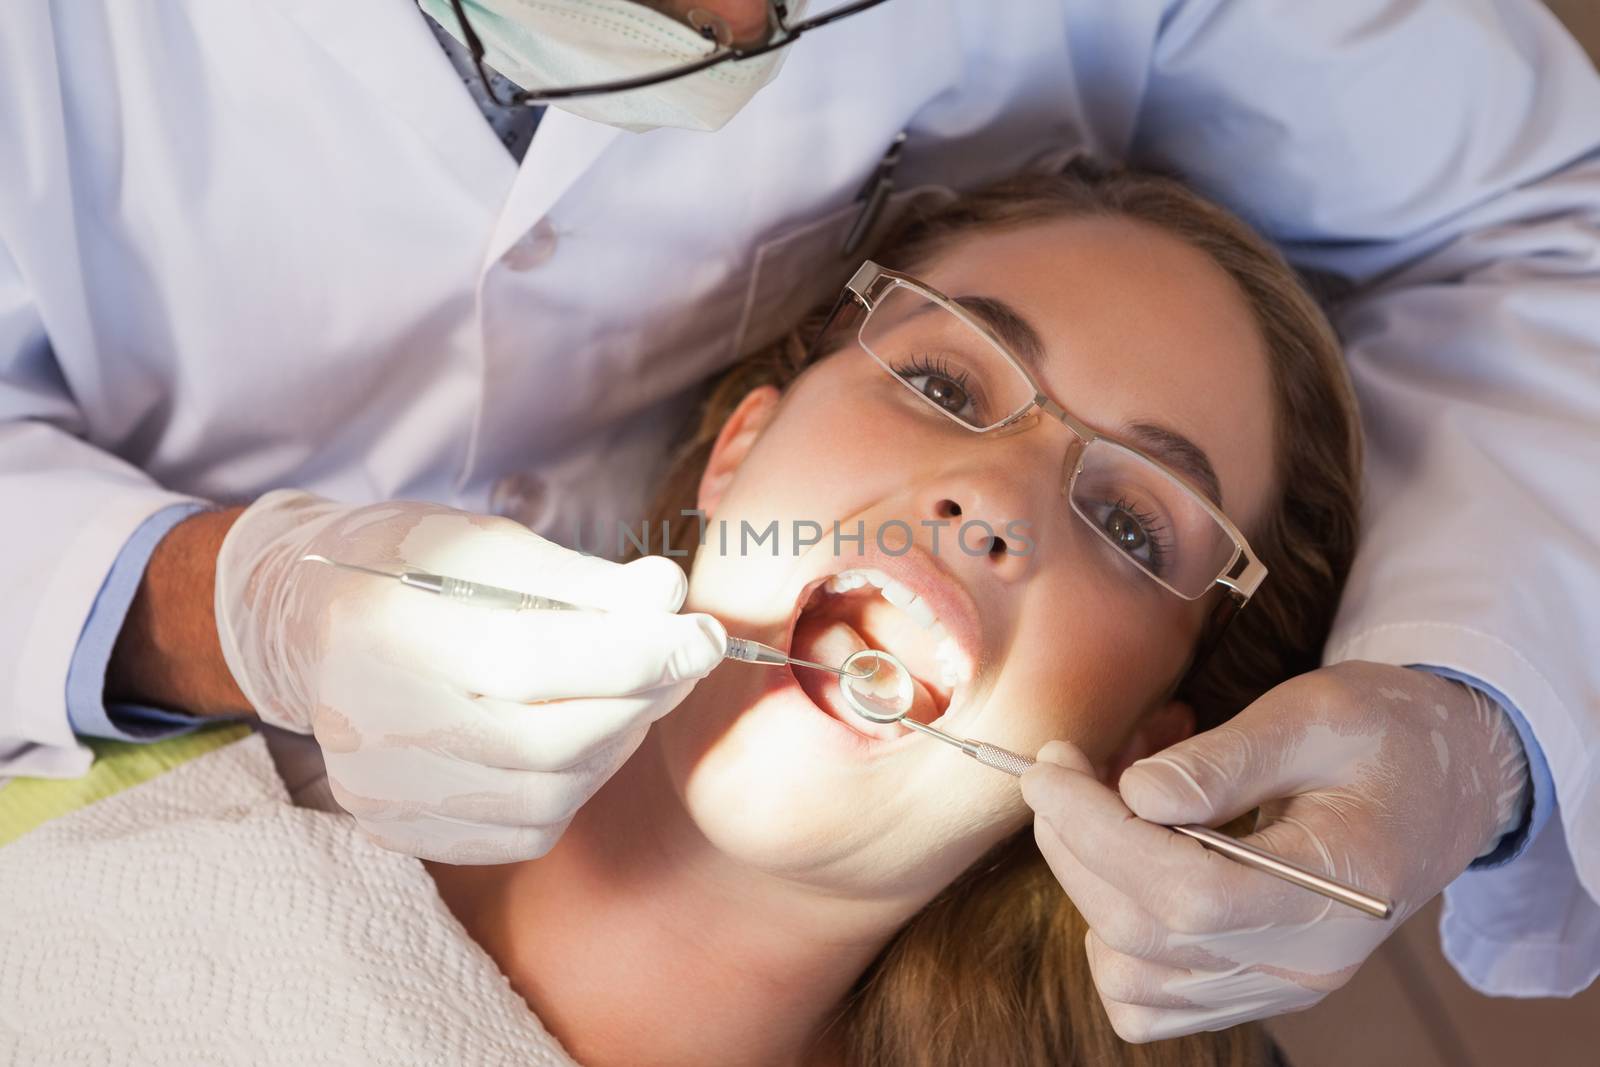 Dentist examining a patients teeth in the dentists chair under bright light by Wavebreakmedia